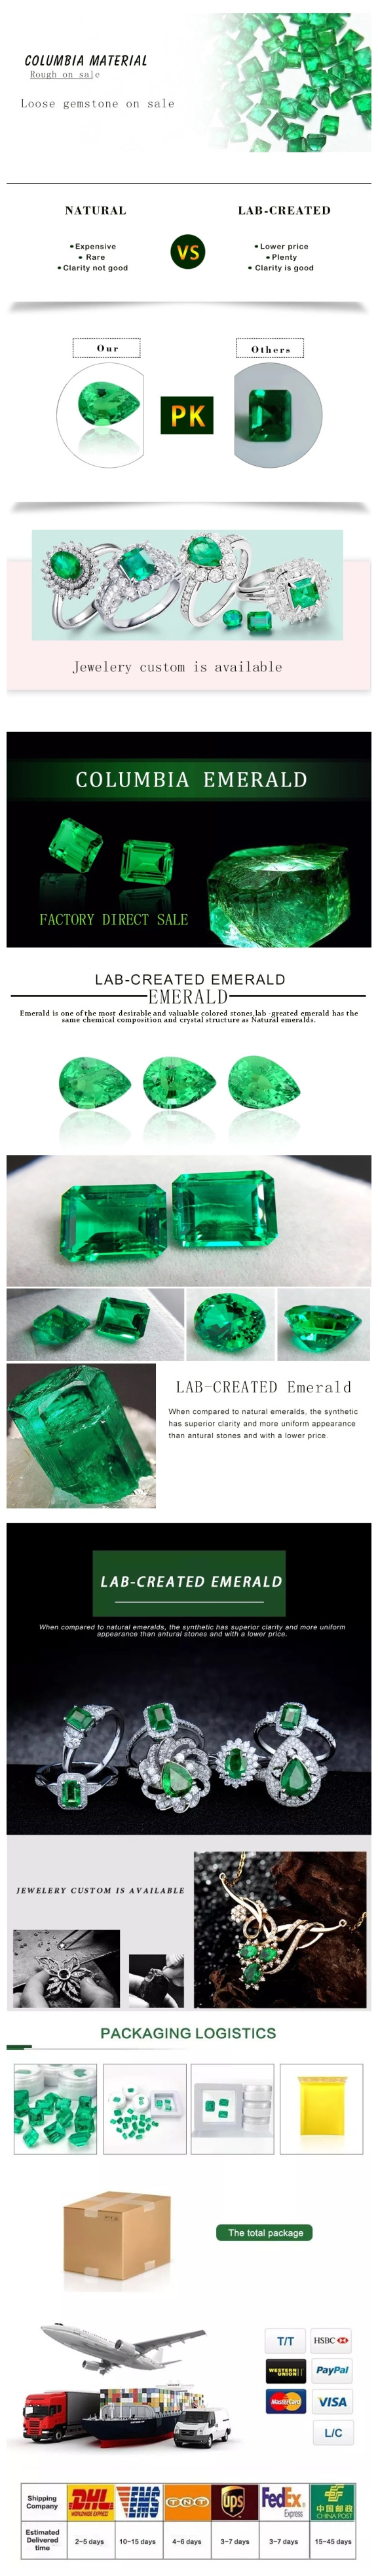 MGO Gem Radiant/Round/Pear/Heart/ Shape Cut Laboratory Made Hydrothermal Emerald Gemstones with High Quality at Wholesale Price